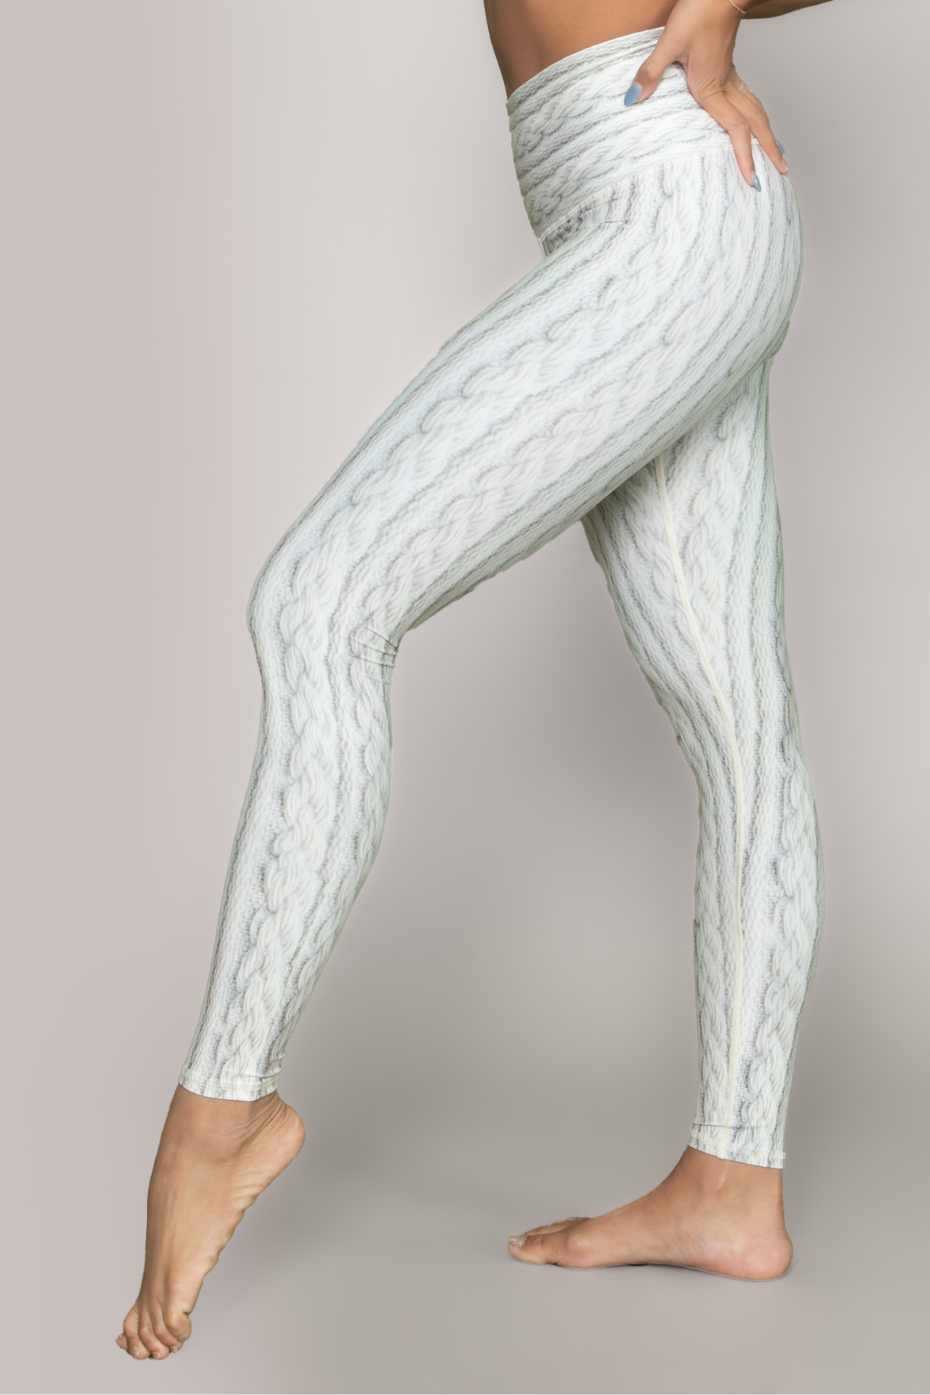 CABLE KNIT LEGGINGS - Green / Blue